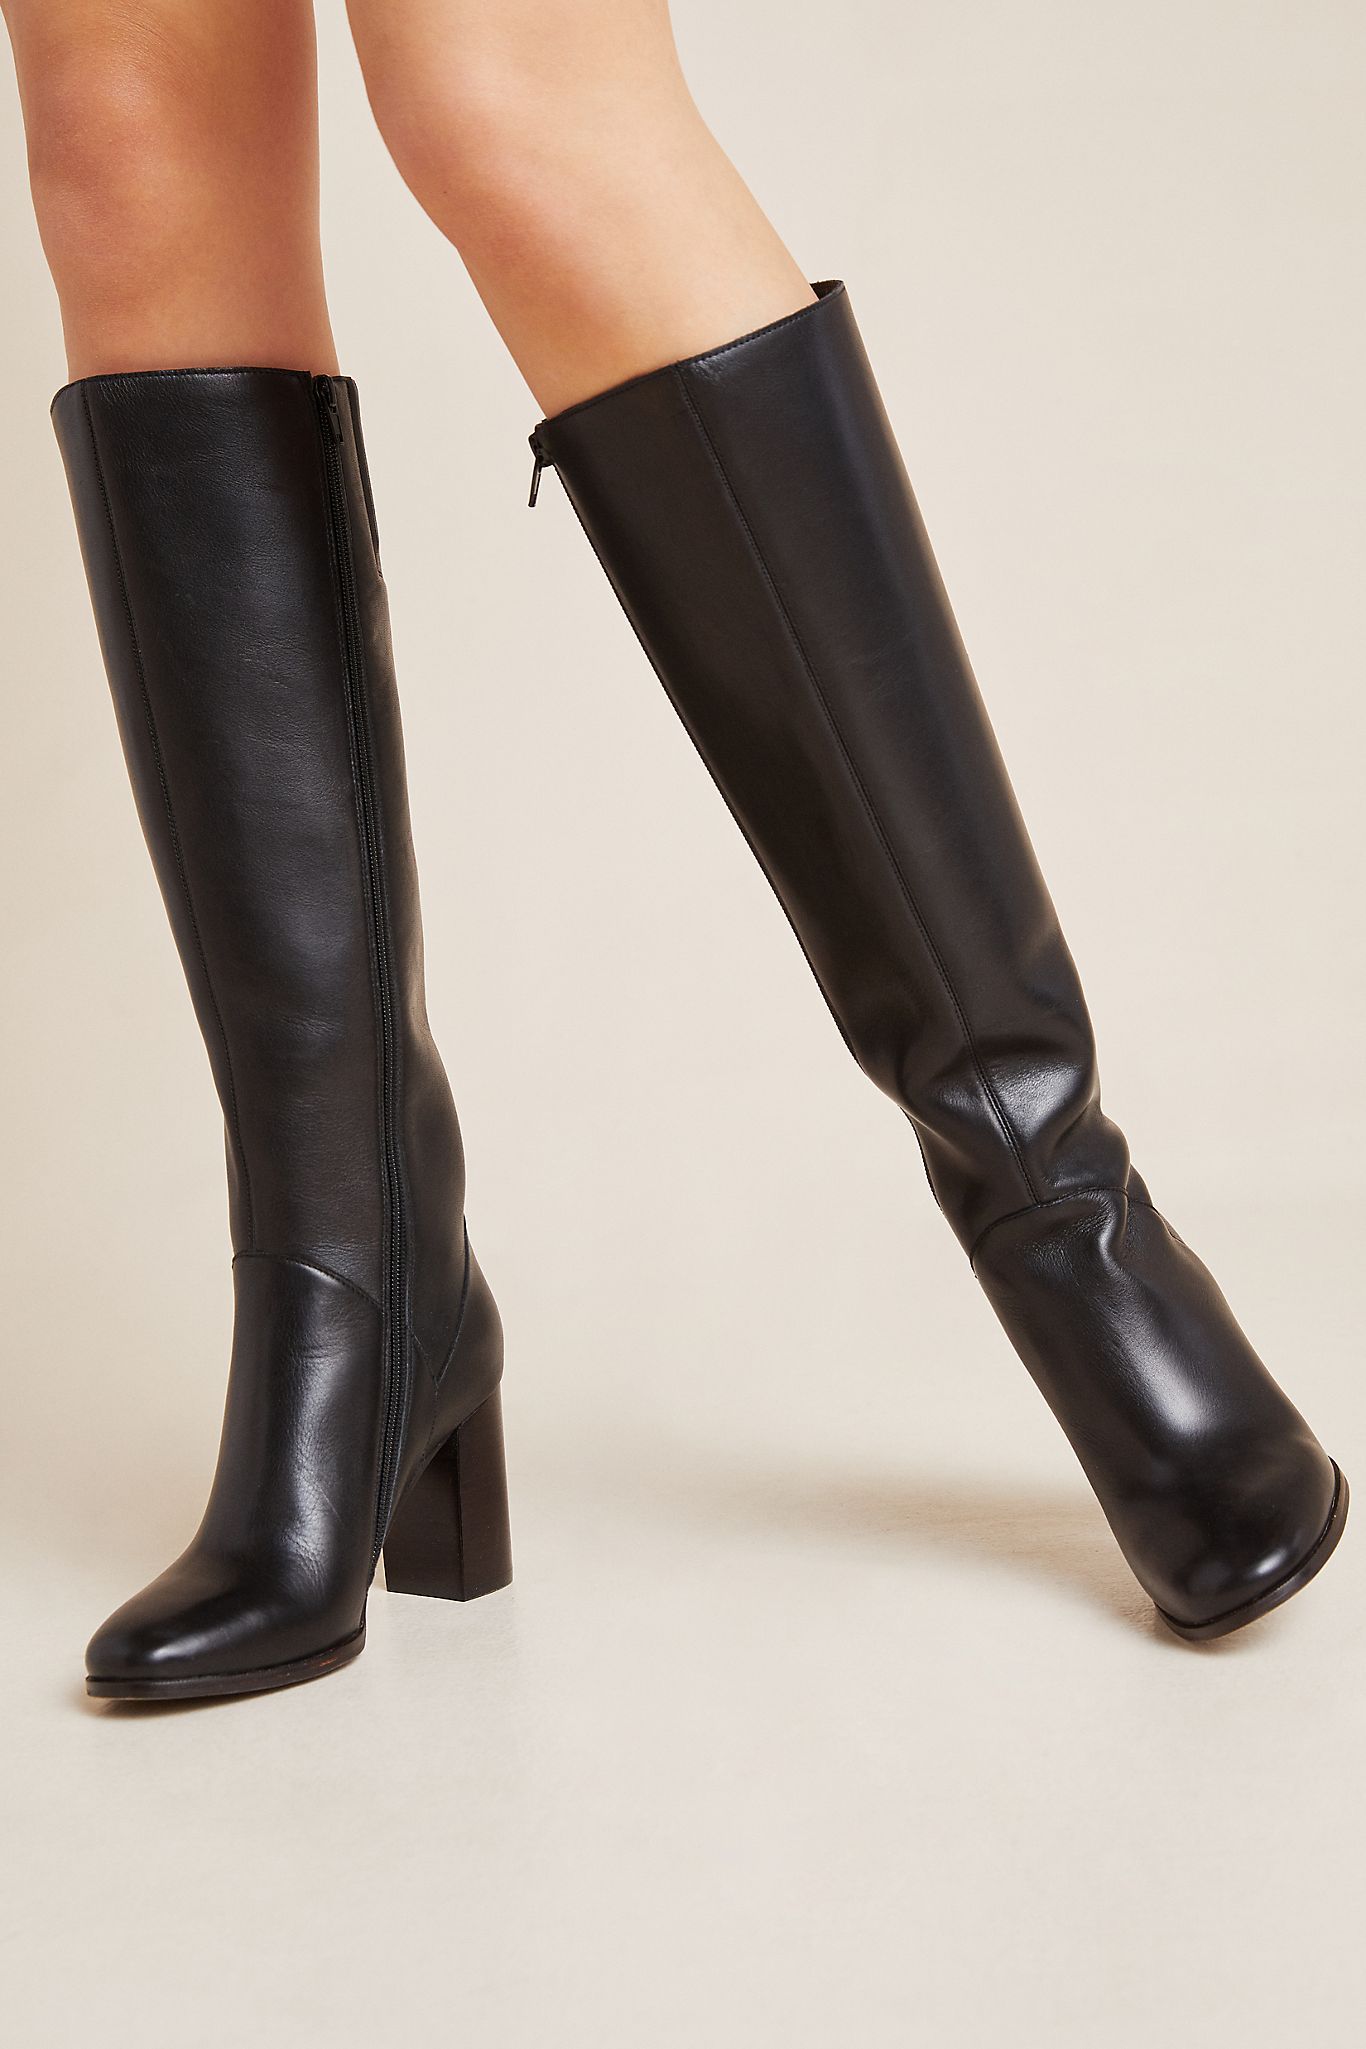 How to Wear Tall Boots: Best 15 Stylish & Chic Outfit Ideas for Women